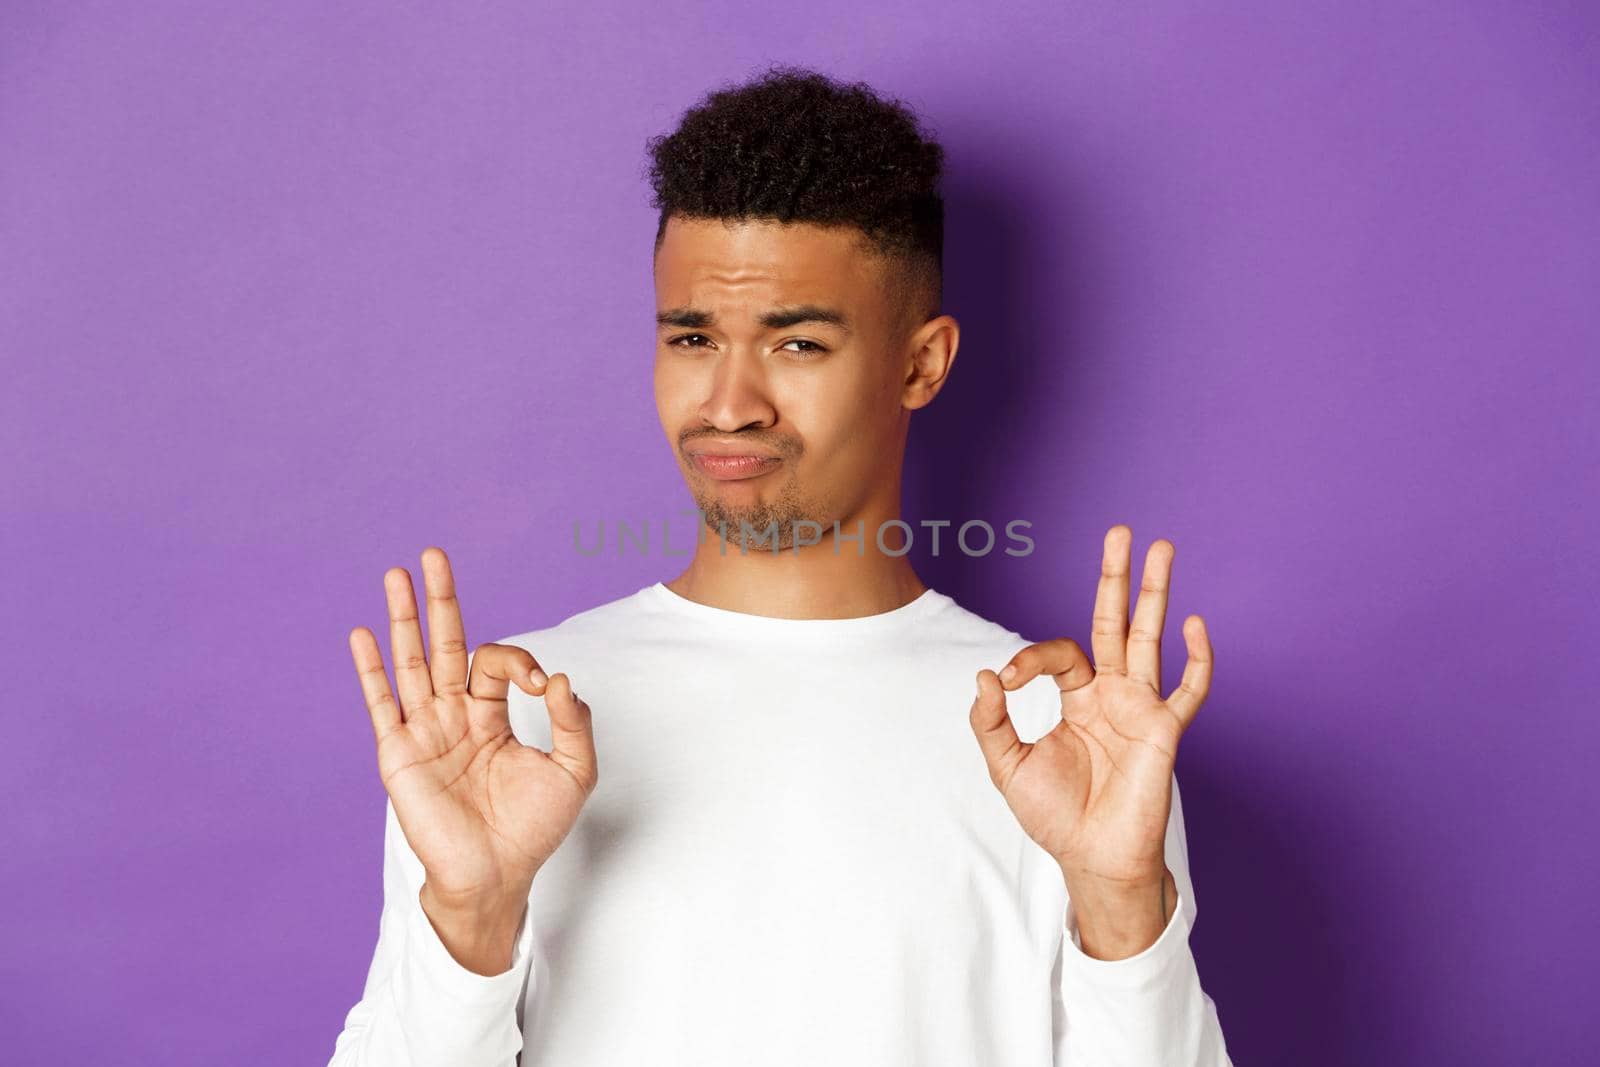 Image of pleased african-american man in white sweatshirt, praise something good, showing okay signs and nod in approval, standing over purple background.